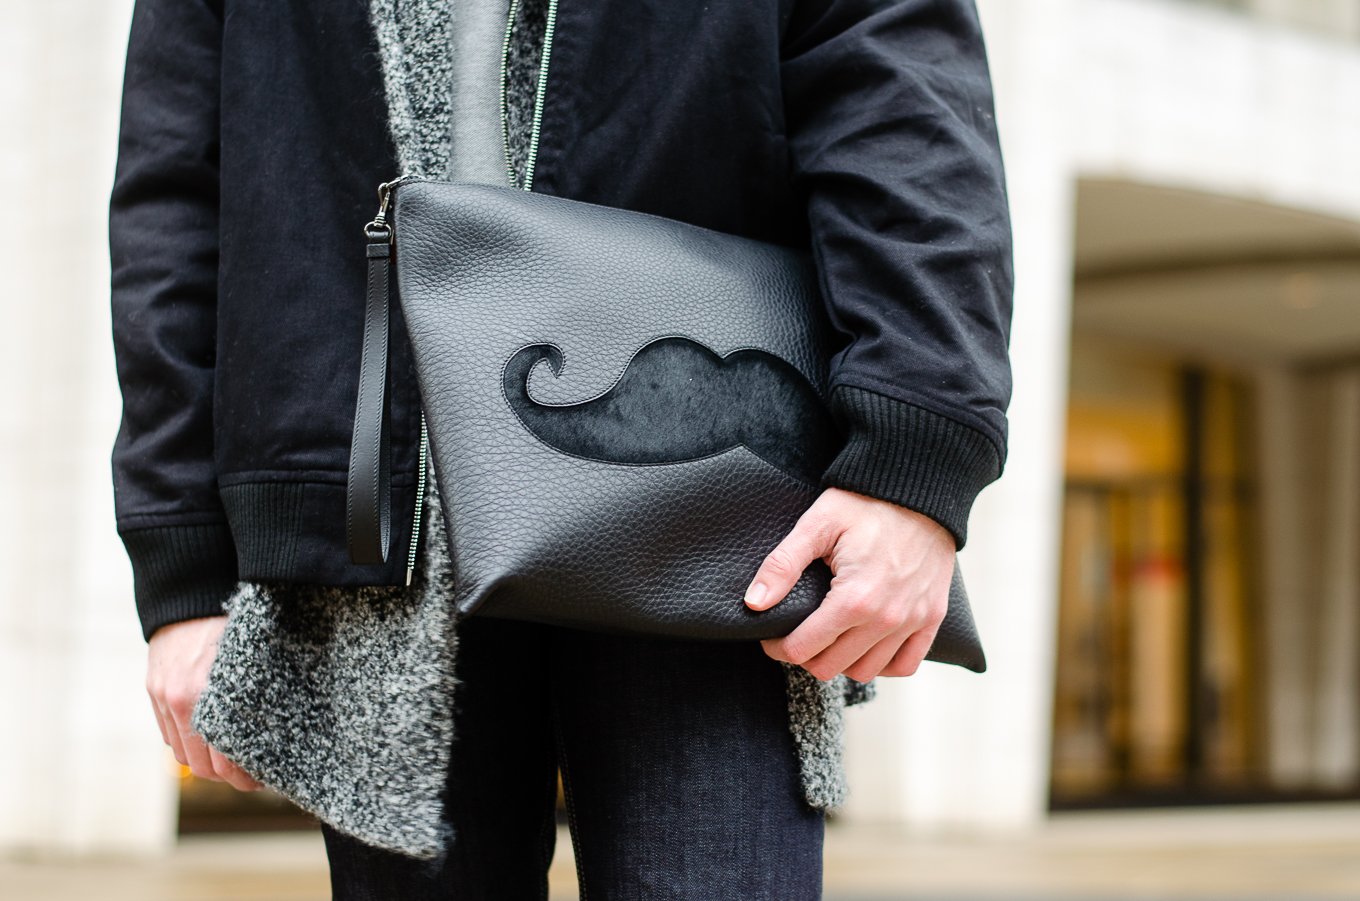 The Kentucky Gent, a men's fashion and lifestyle blogger, spends his first day of NYFW at Lincoln Center in Christian Louboutin sneakers and bag.